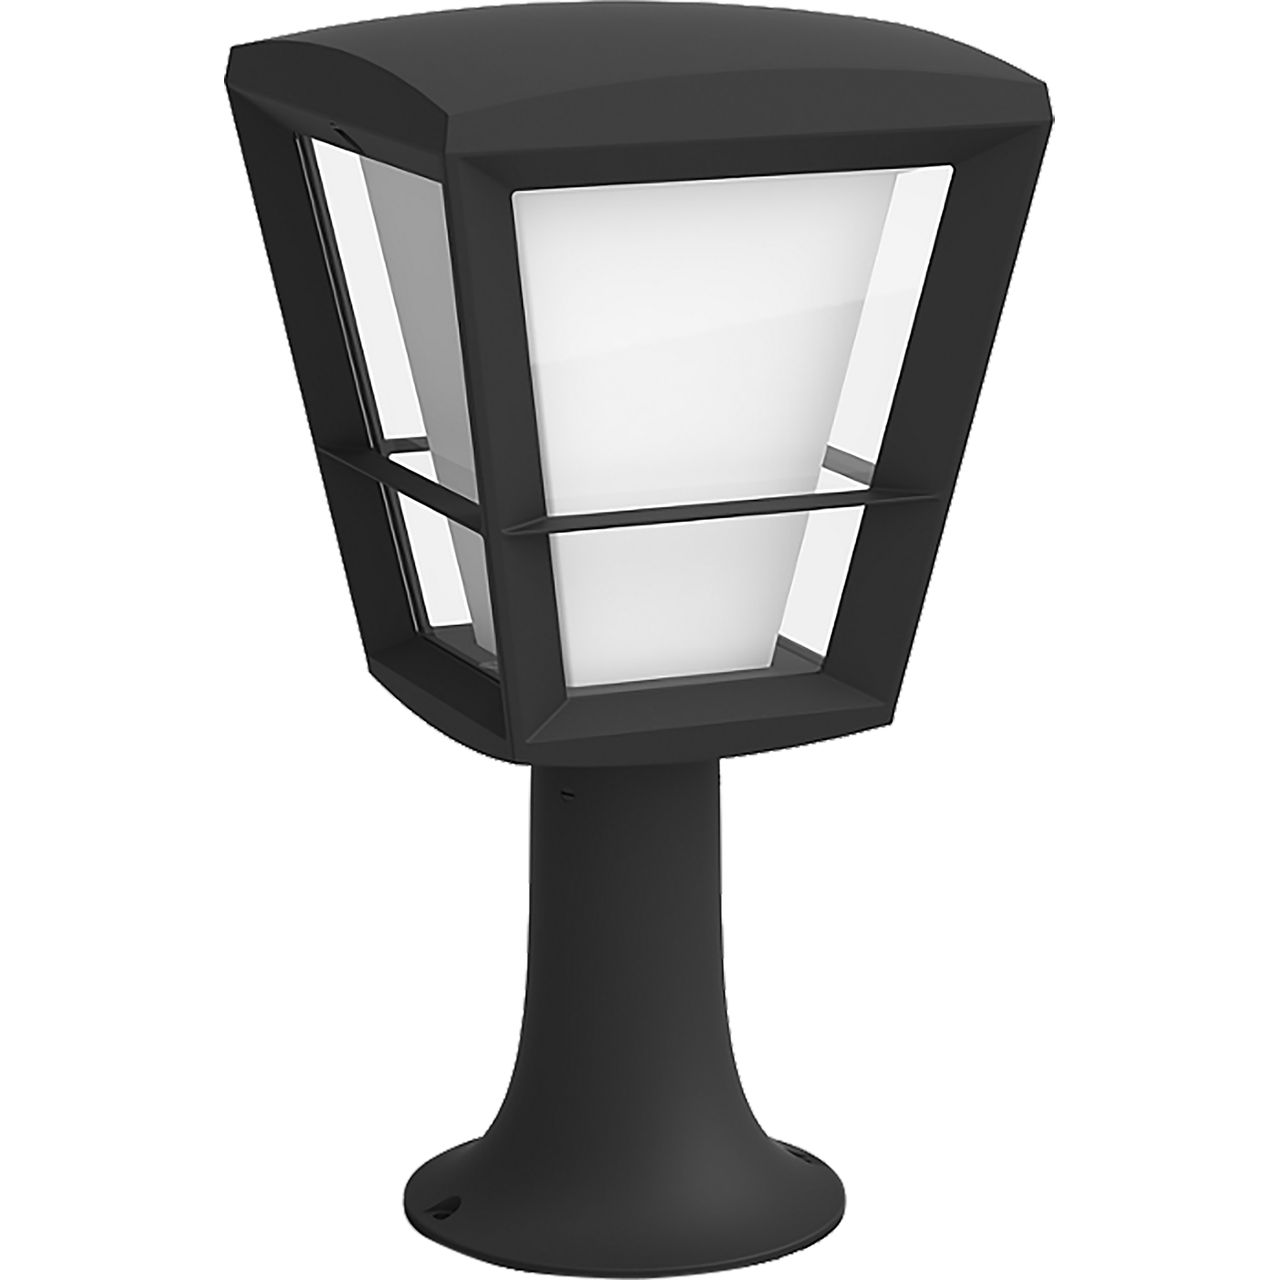 Philips Hue Econic Outdoor Pedestal Light Review